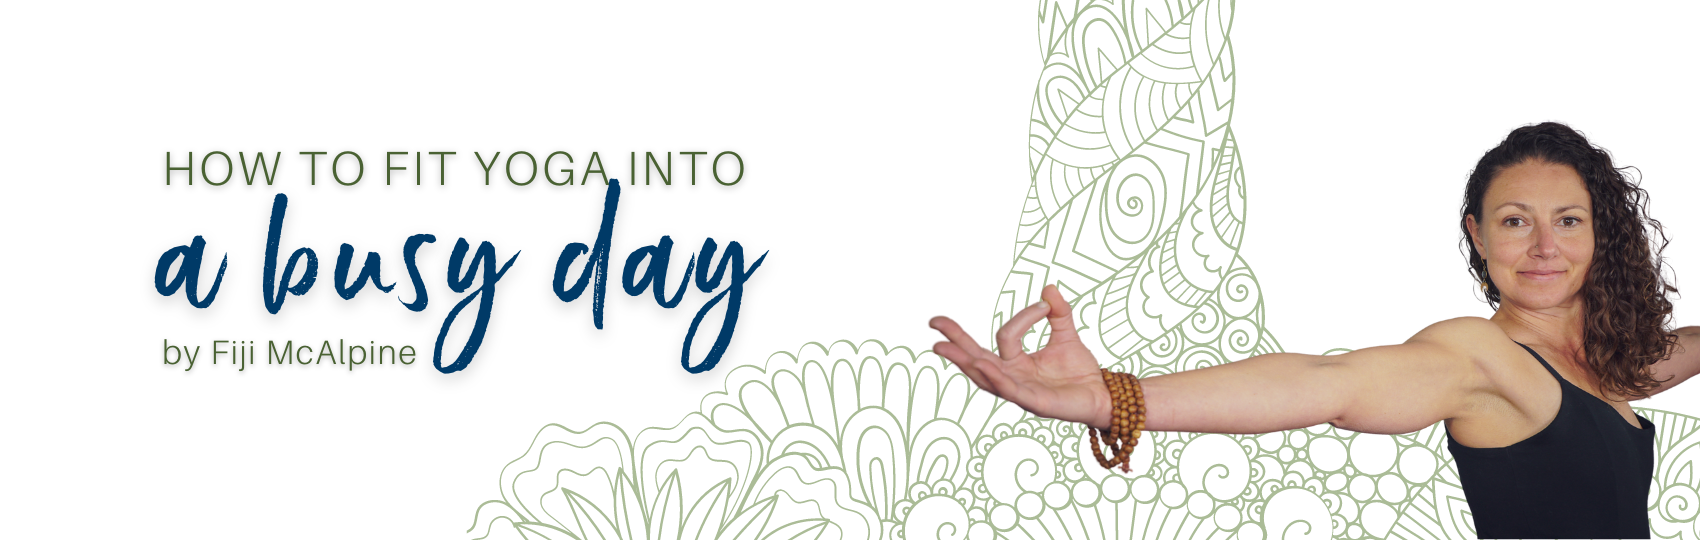 How to Fit Yoga into a Busy Day Banner